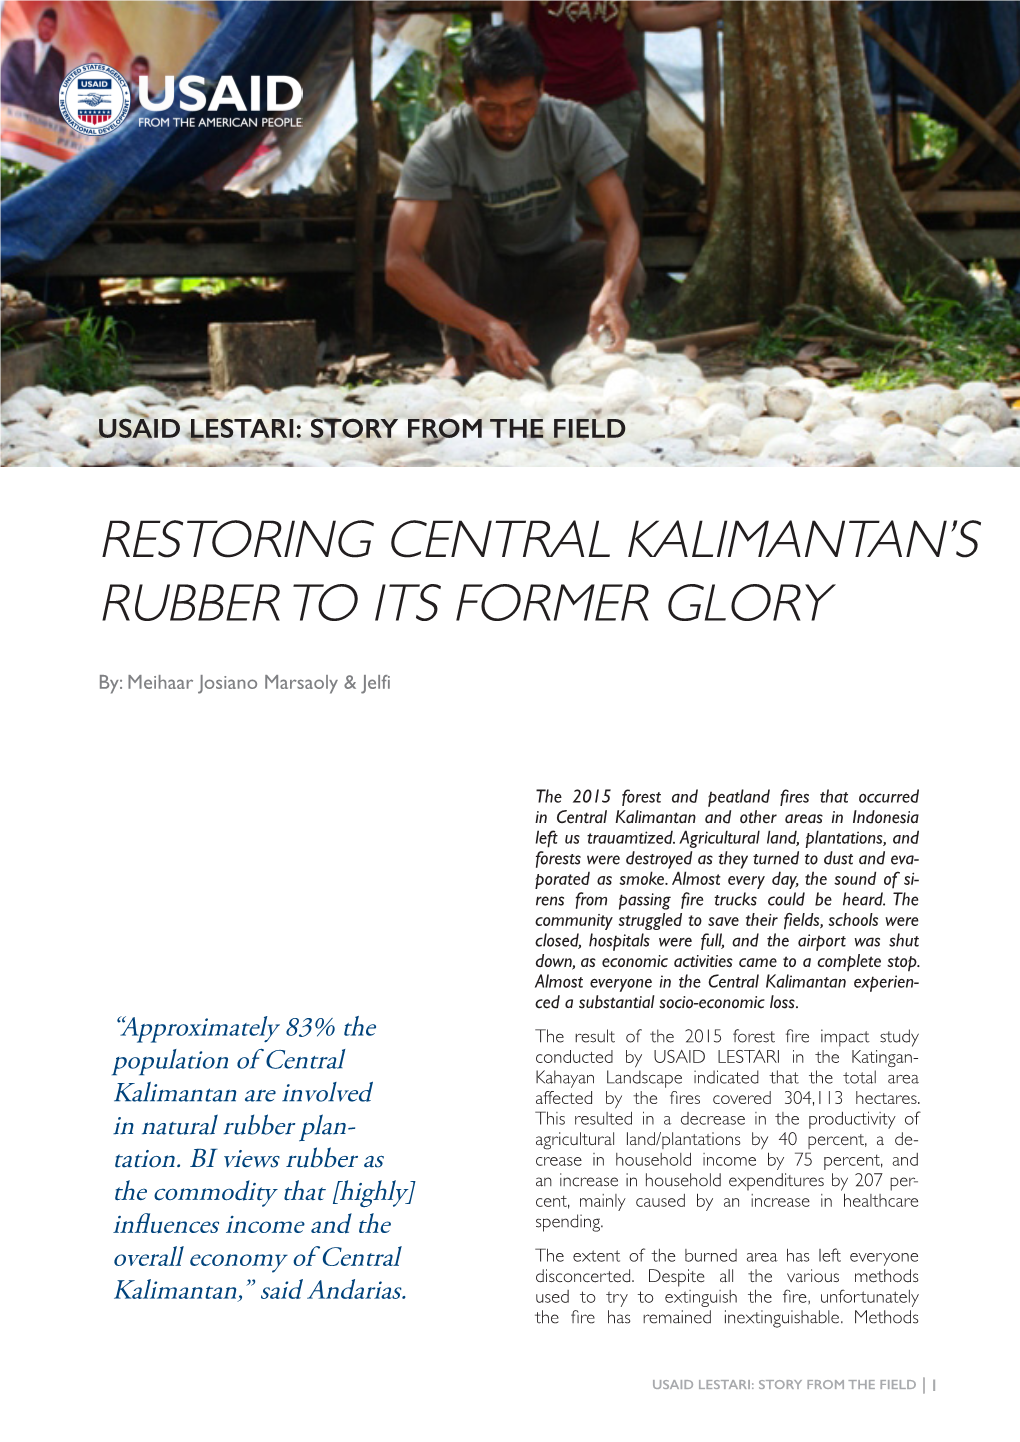 Restoring Central Kalimantan's Rubber to Its